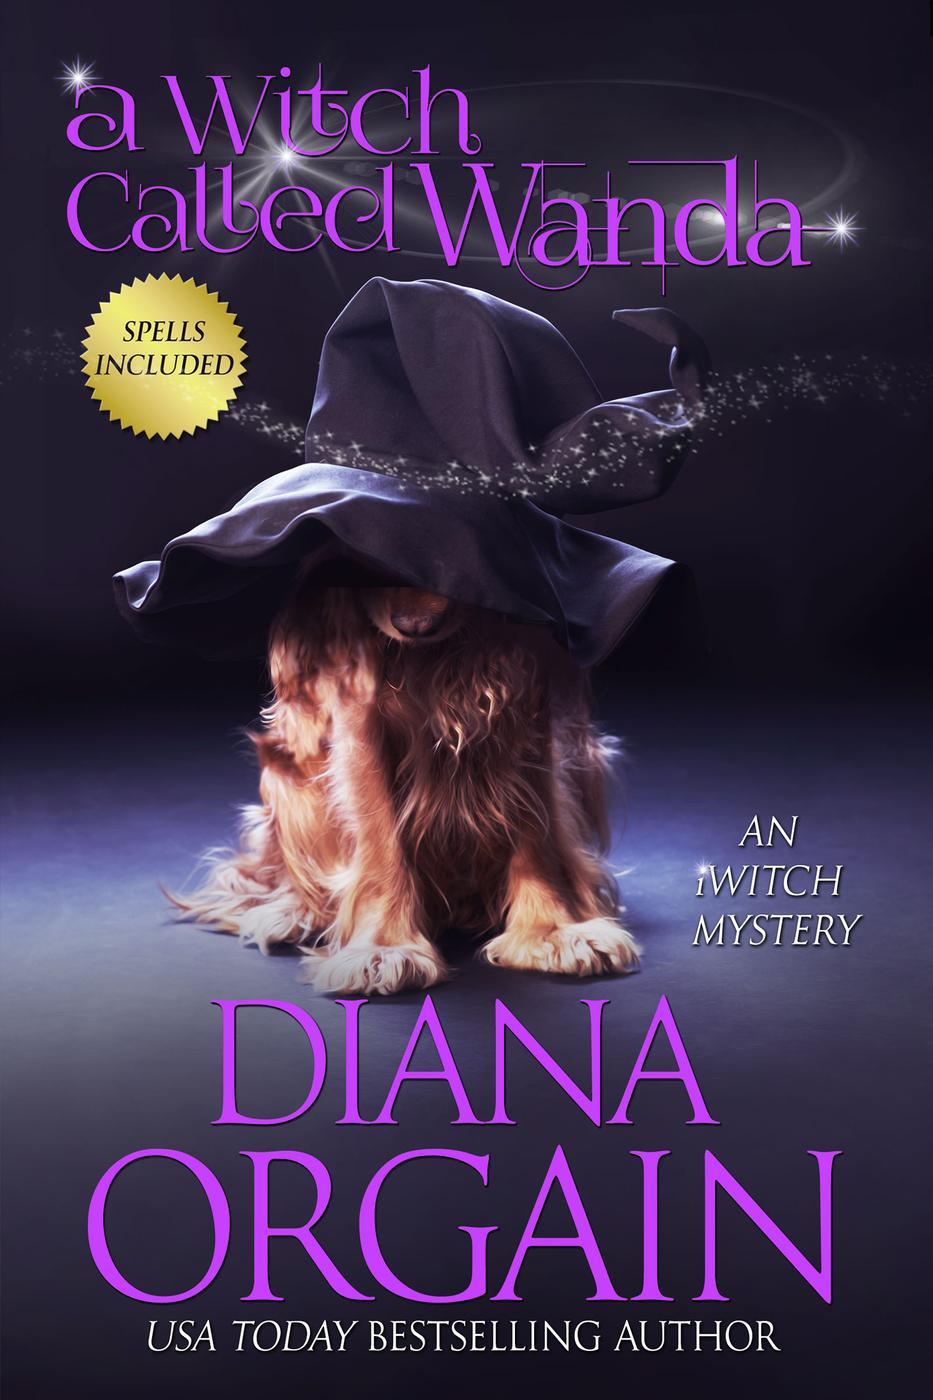 iWitch Mystery Series E-BOOK bundle